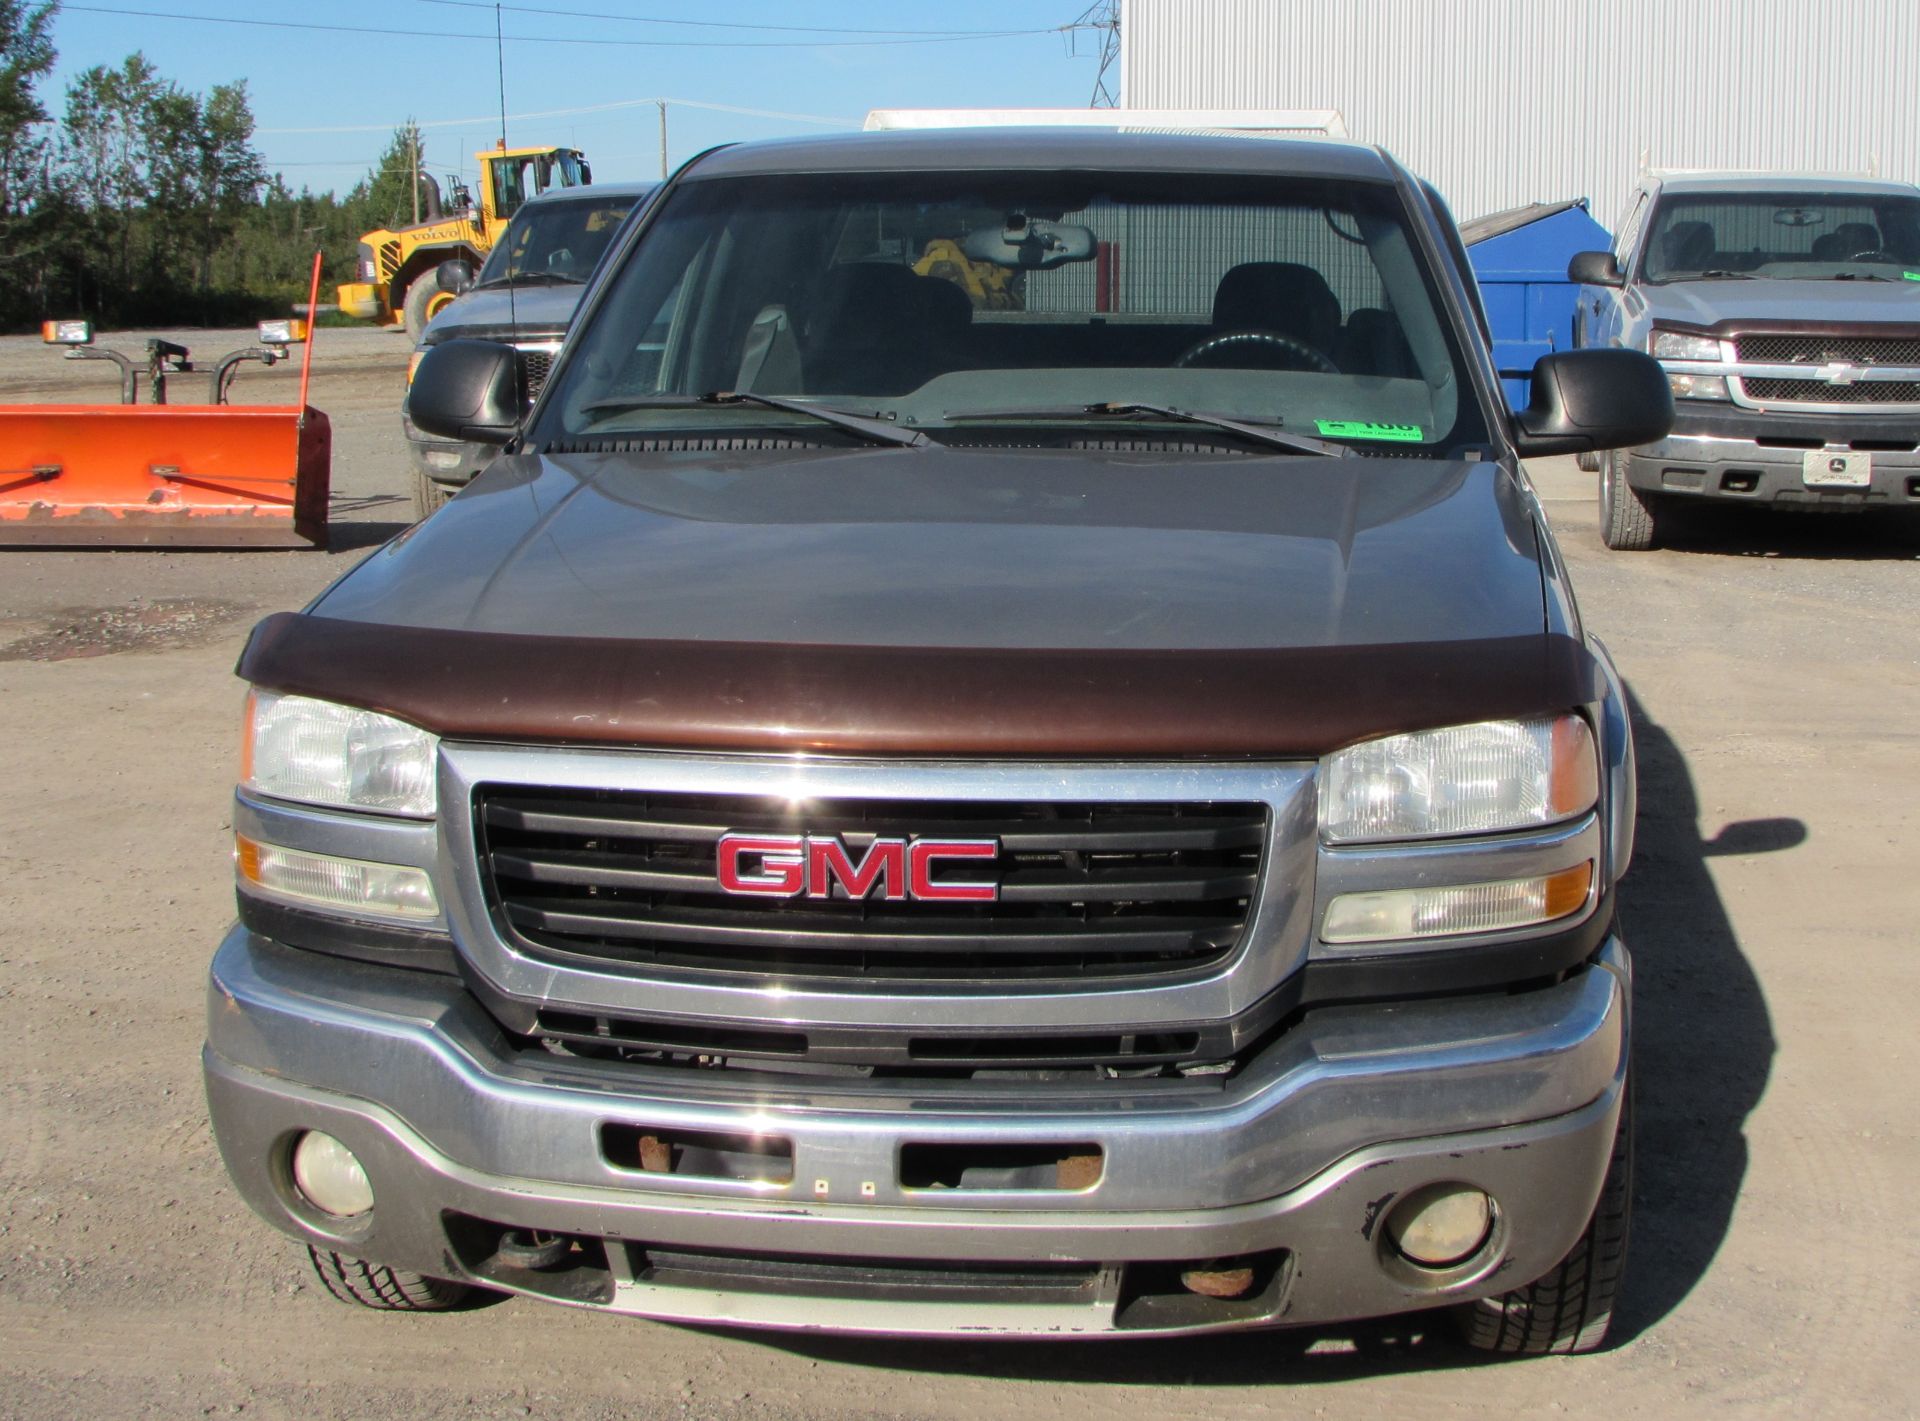 2003 GMC SIERRA PICK UP C/W 4X4, 6.0L ENGINE,  FULL SIZE BOX, BOX LINER, RUNNING BOARDS, APPROX. - Image 2 of 7